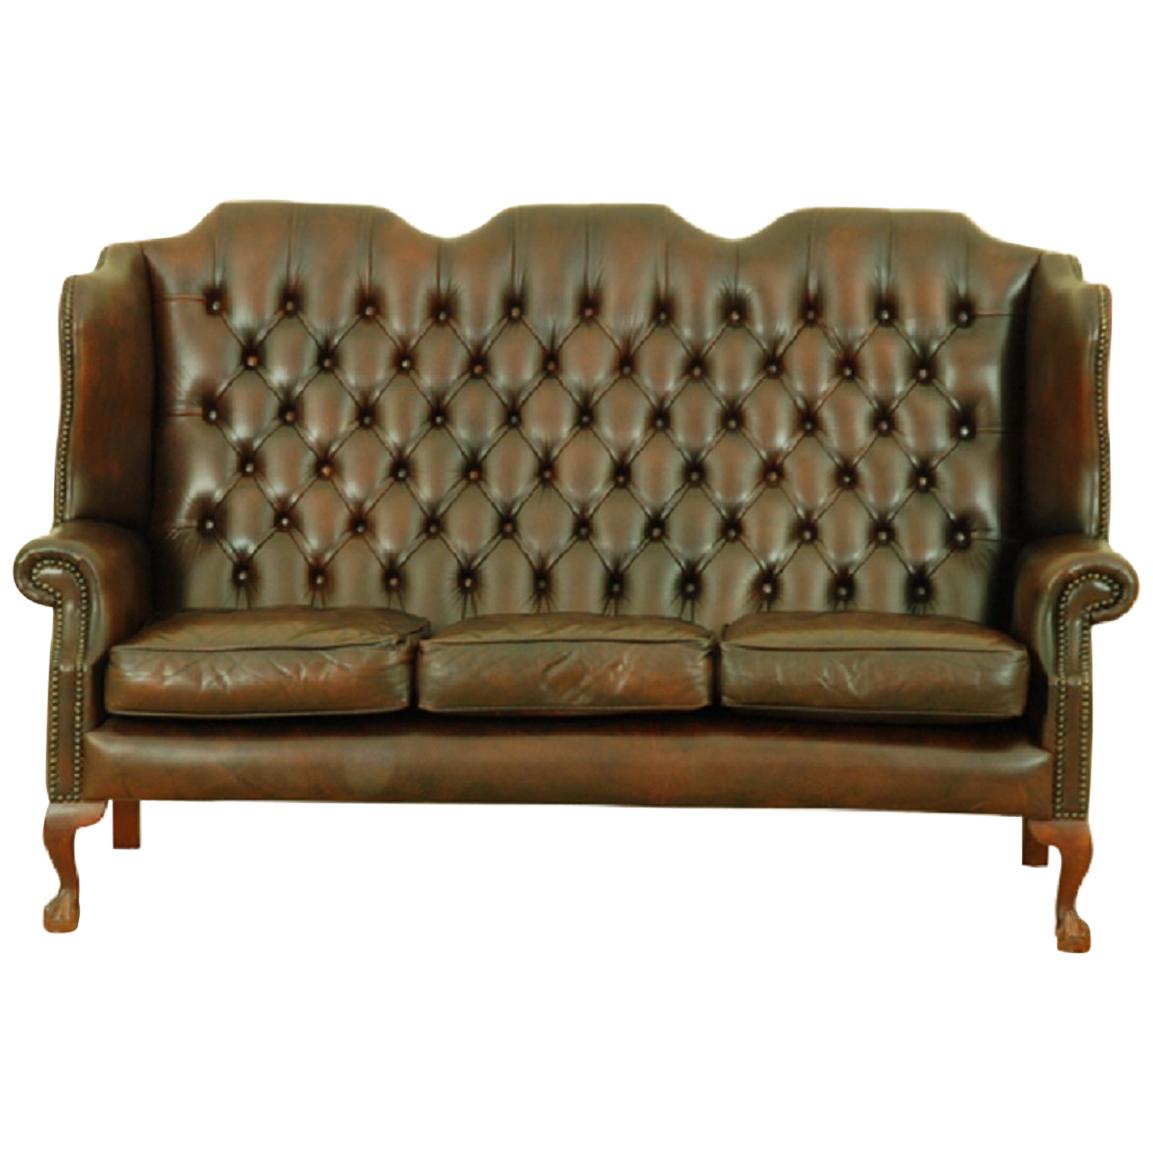 Delta Chesterfield Queen Anne Playwing Regency Three-Seat For Sale